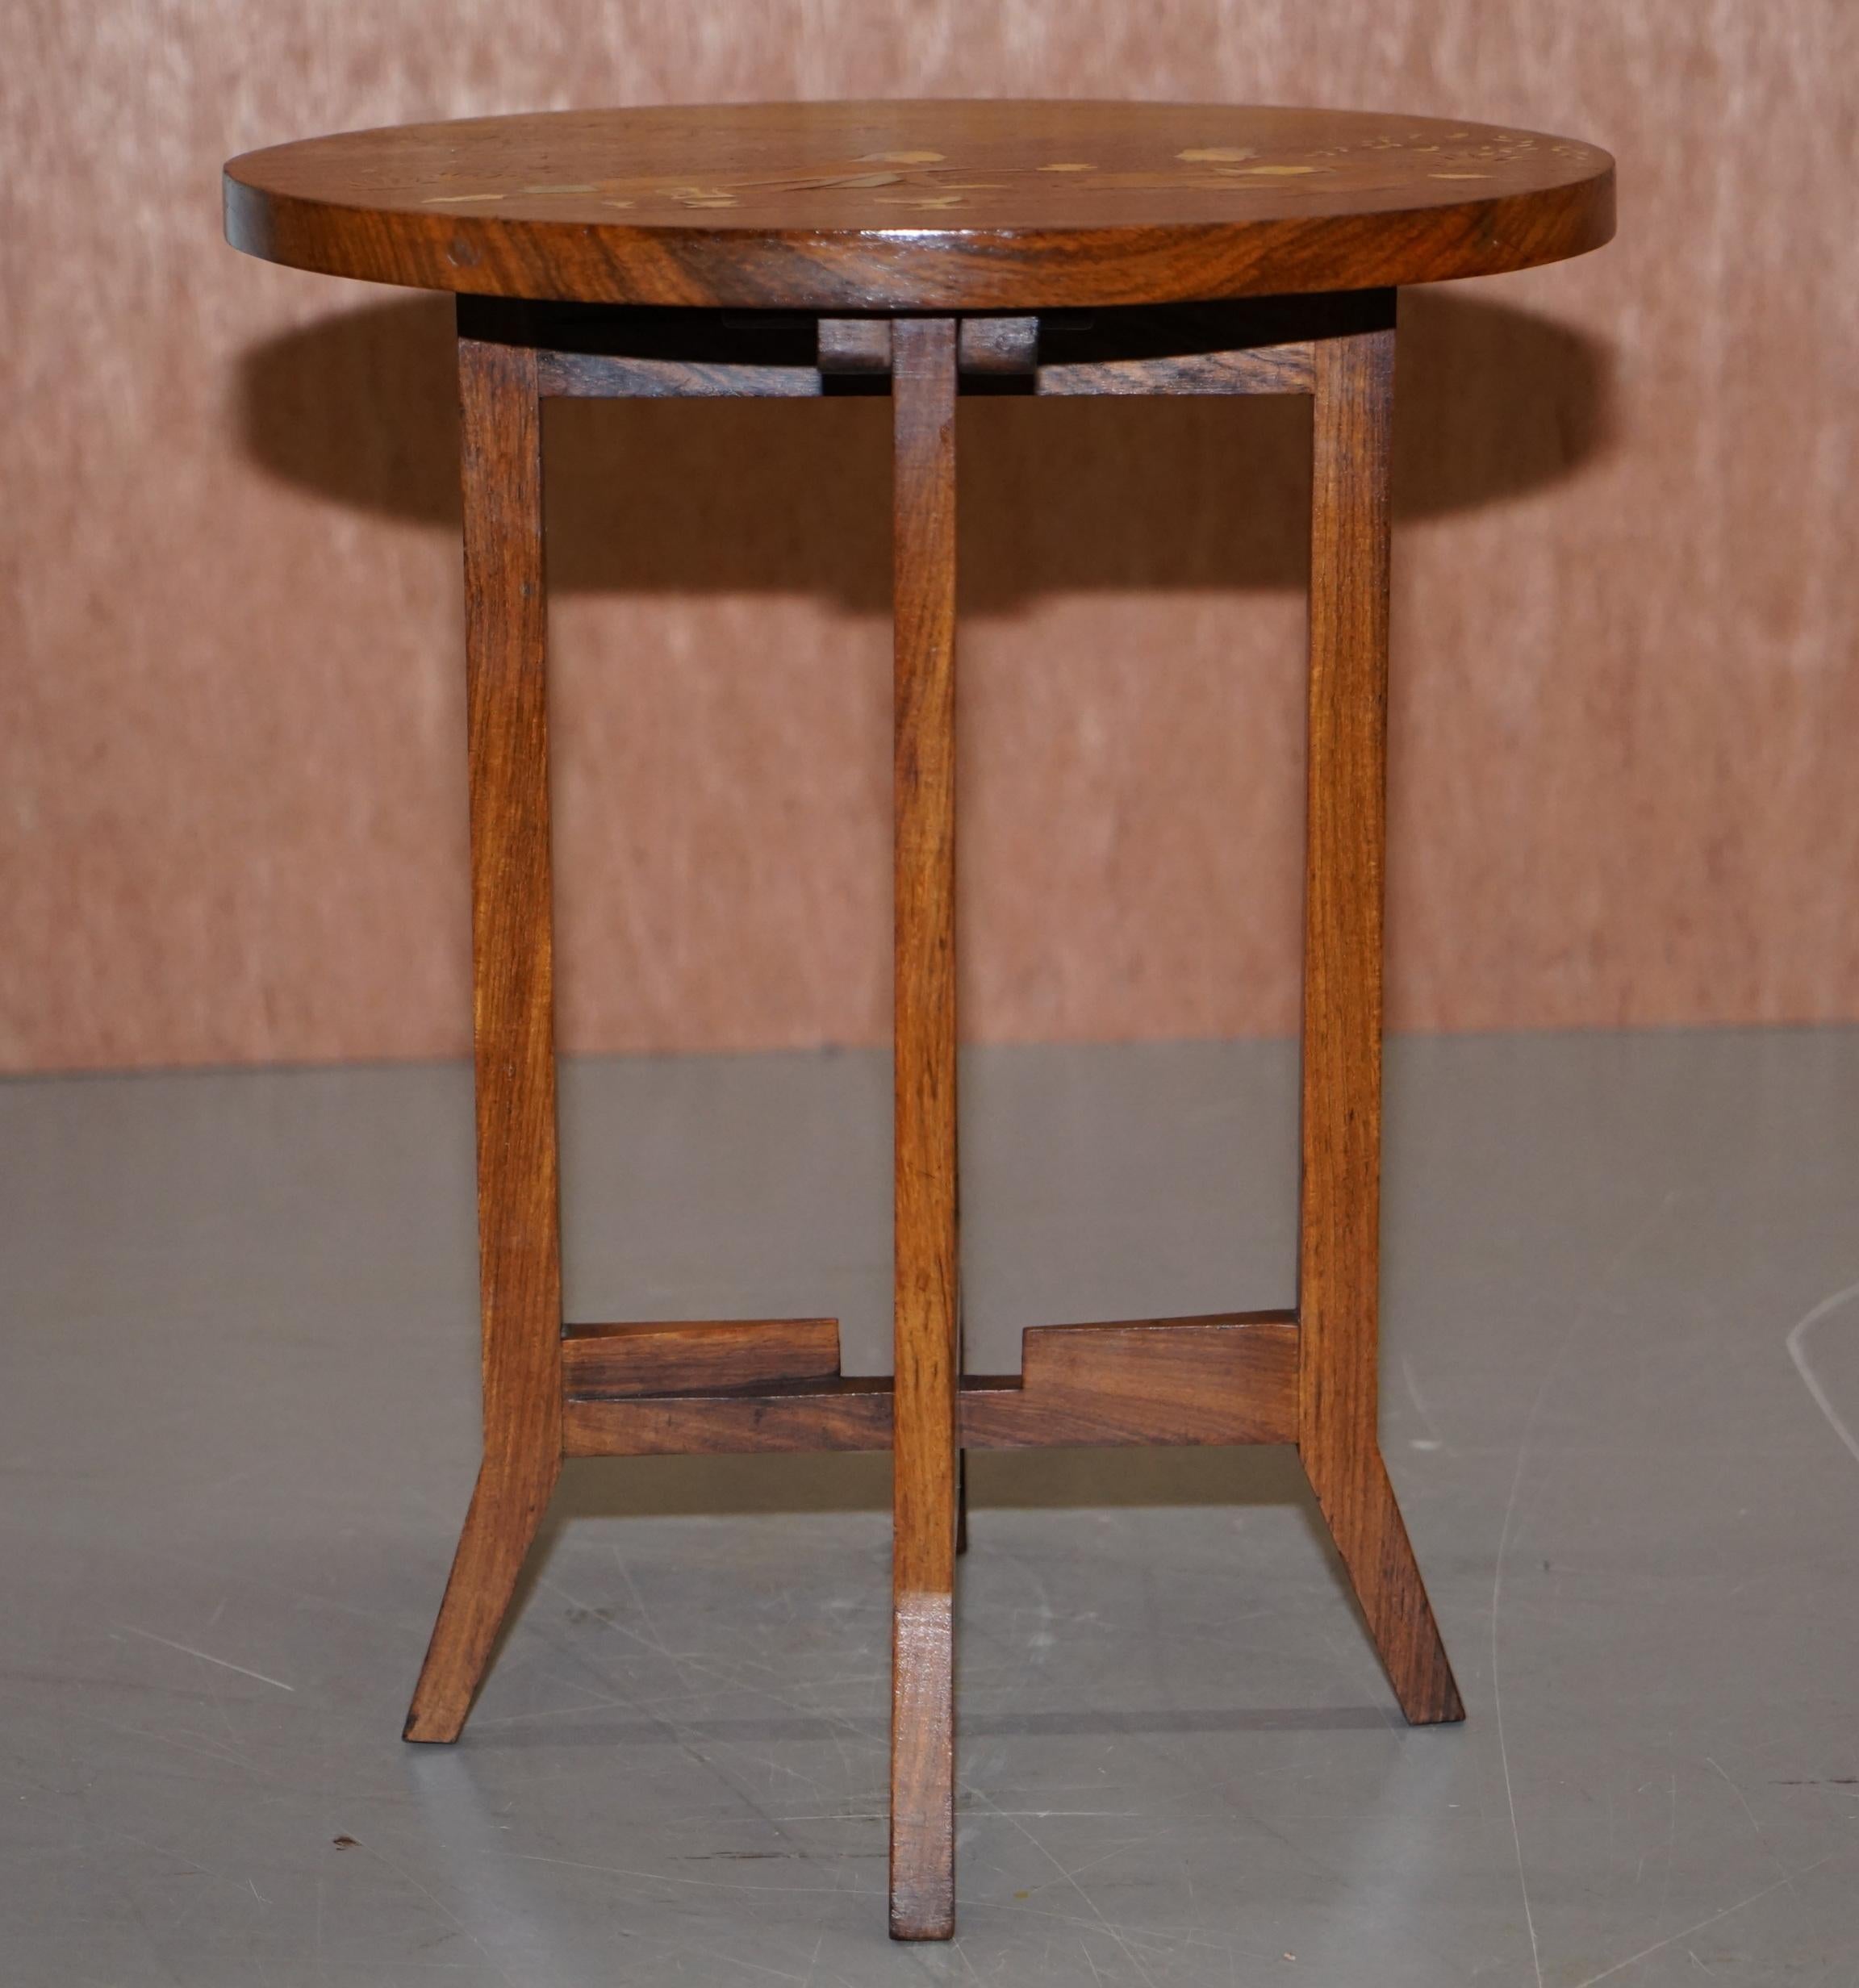 Early 20th Century Restored Antique Japanese Shibayama Inlaid Romantic Lovers Hardwood Side Table For Sale